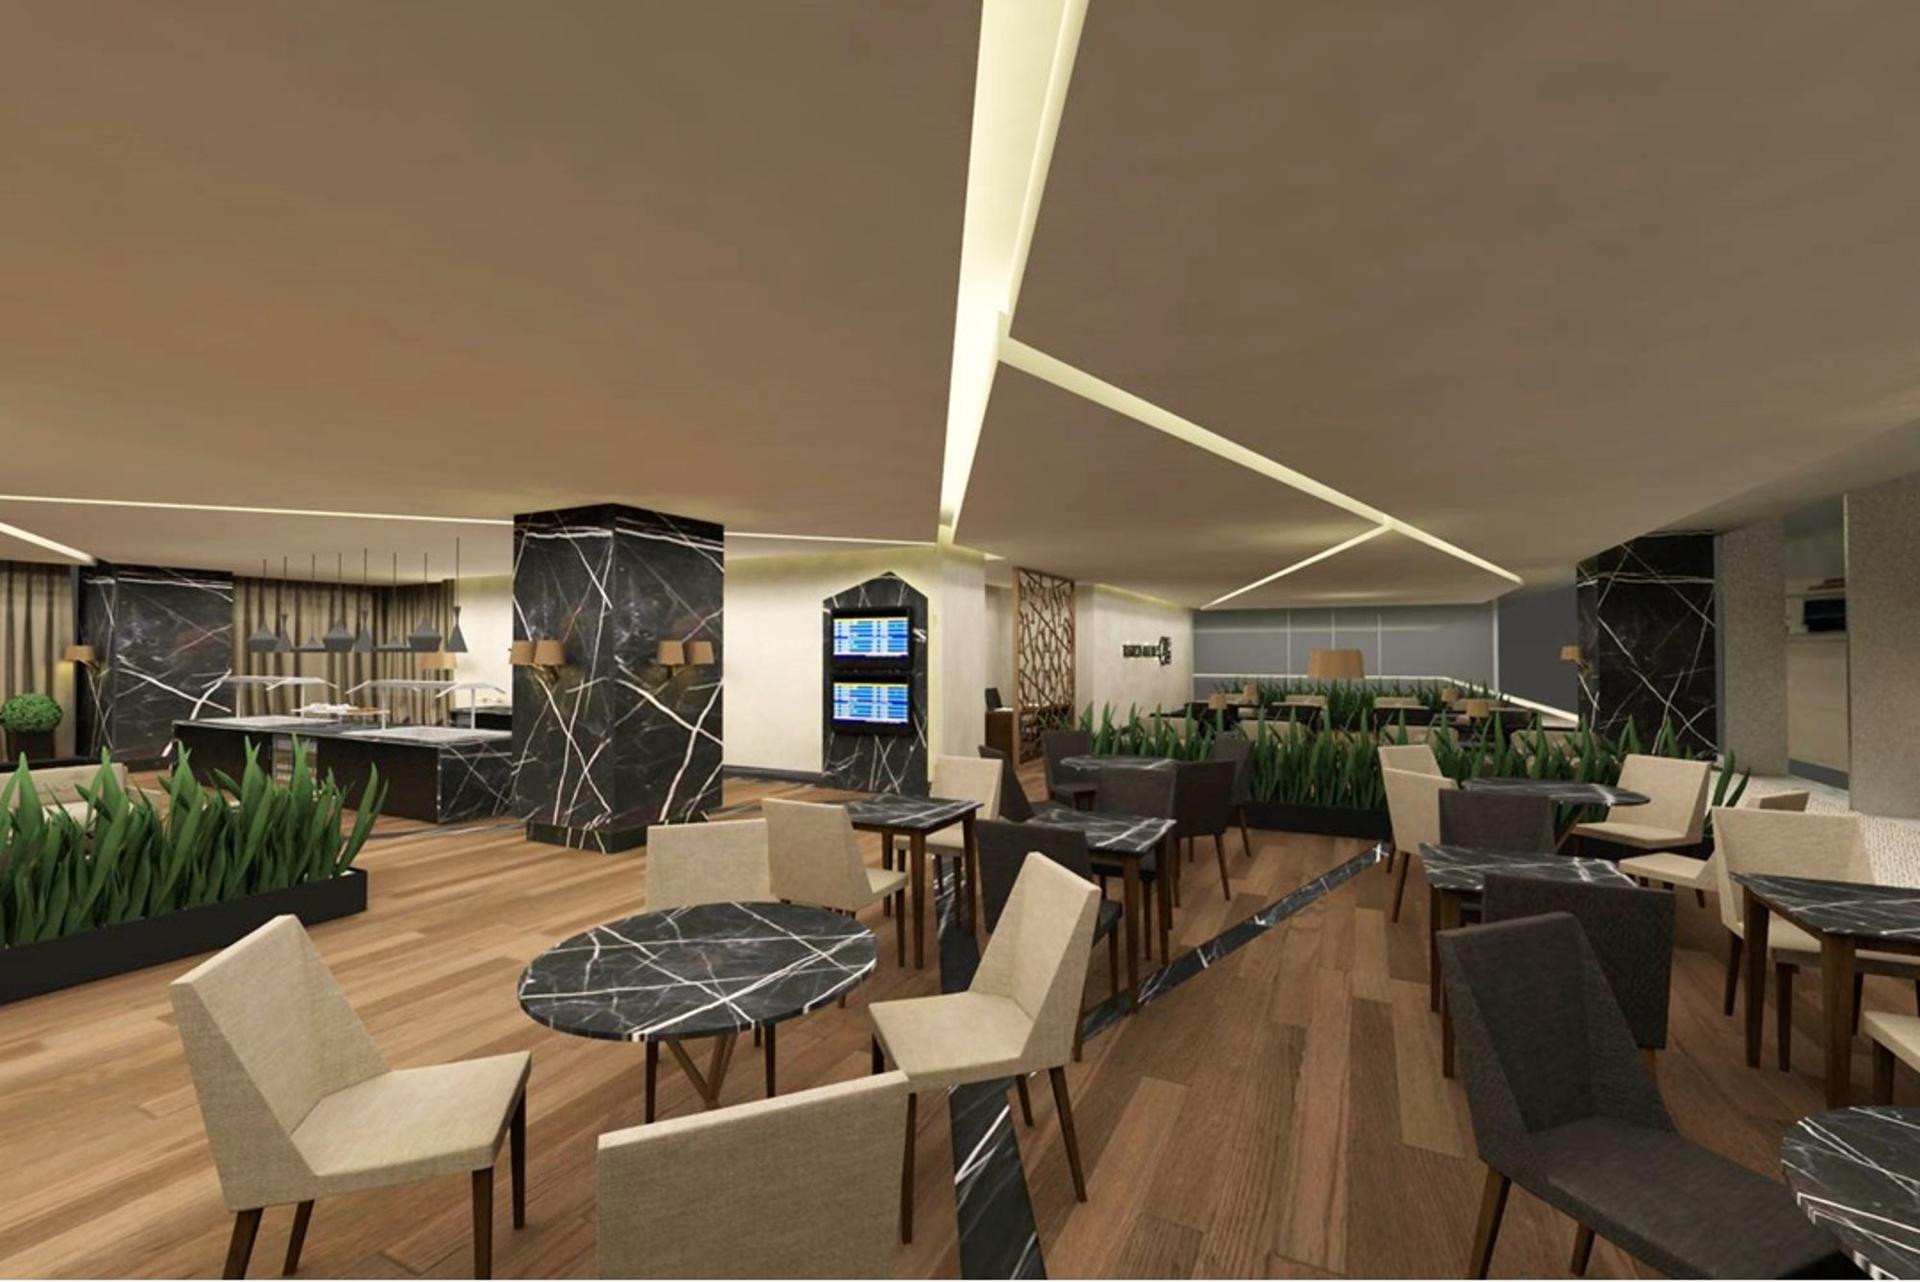 Turkish Airlines CIP Lounge (Business Lounge) image 8 of 27